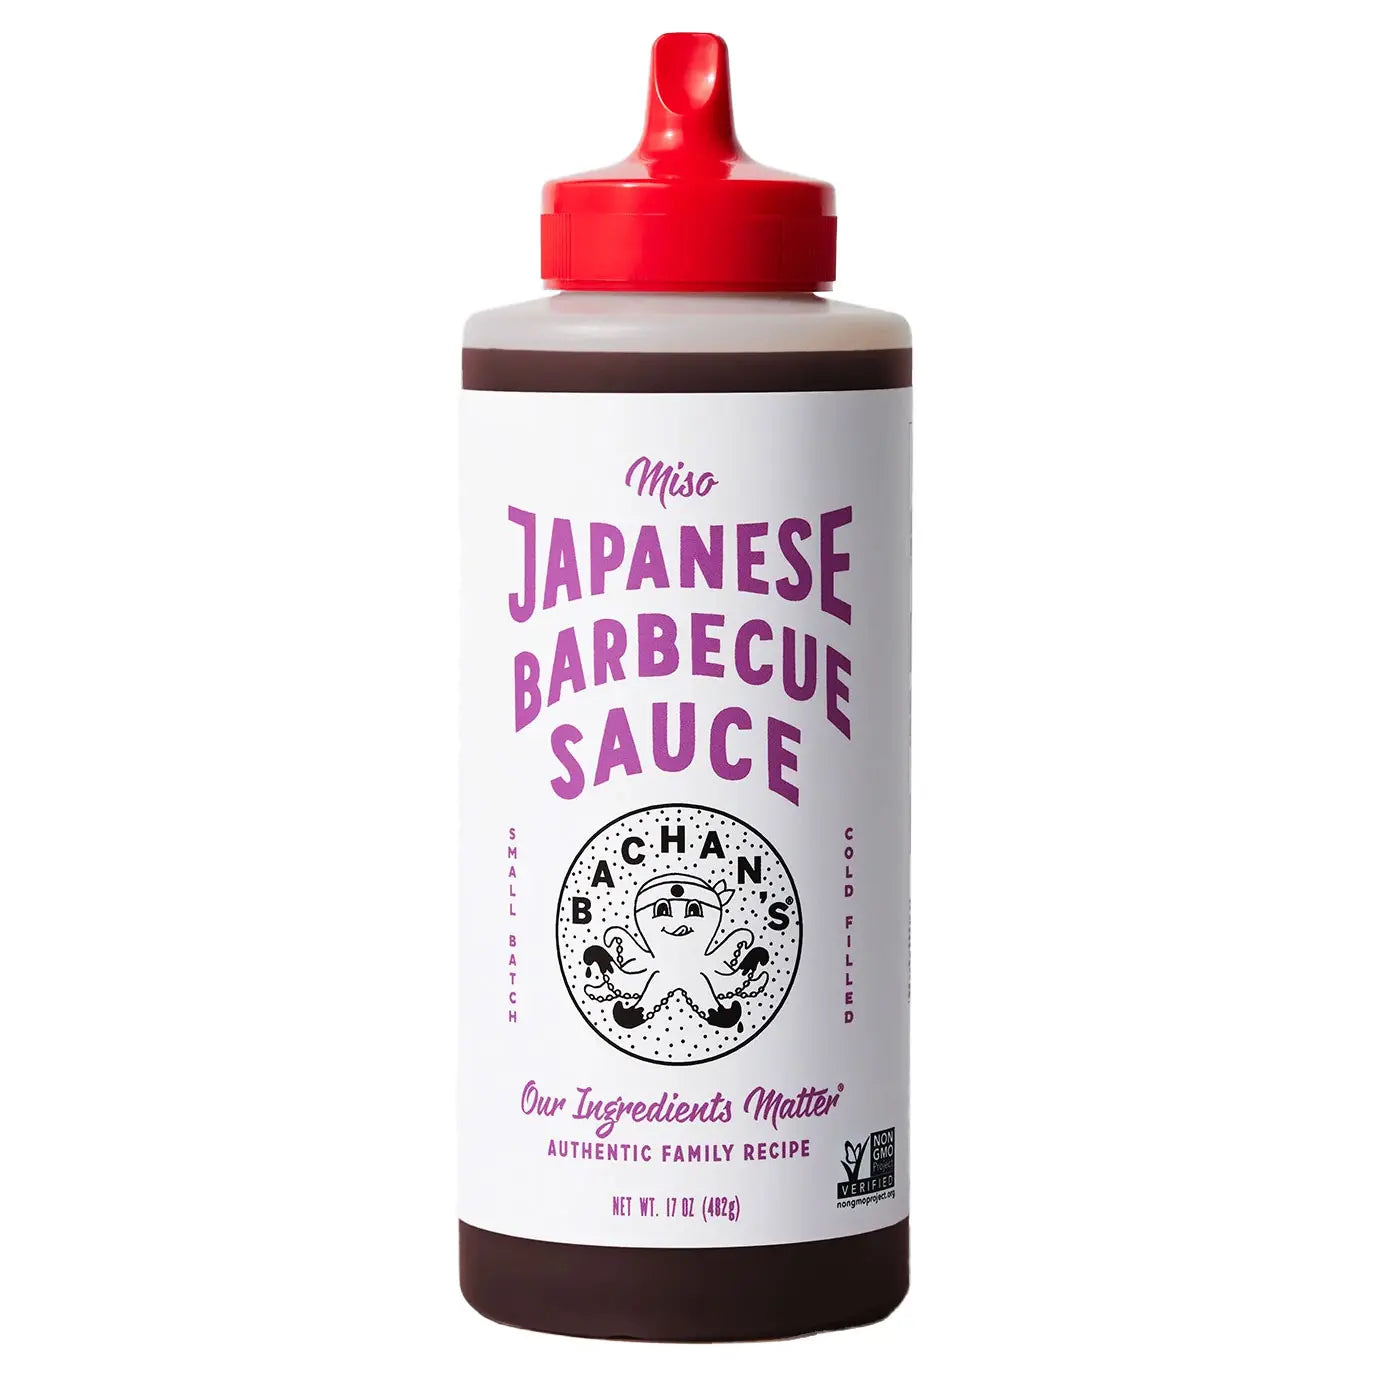 Bachan's Miso Japanese Barbecue Sauce 12045123